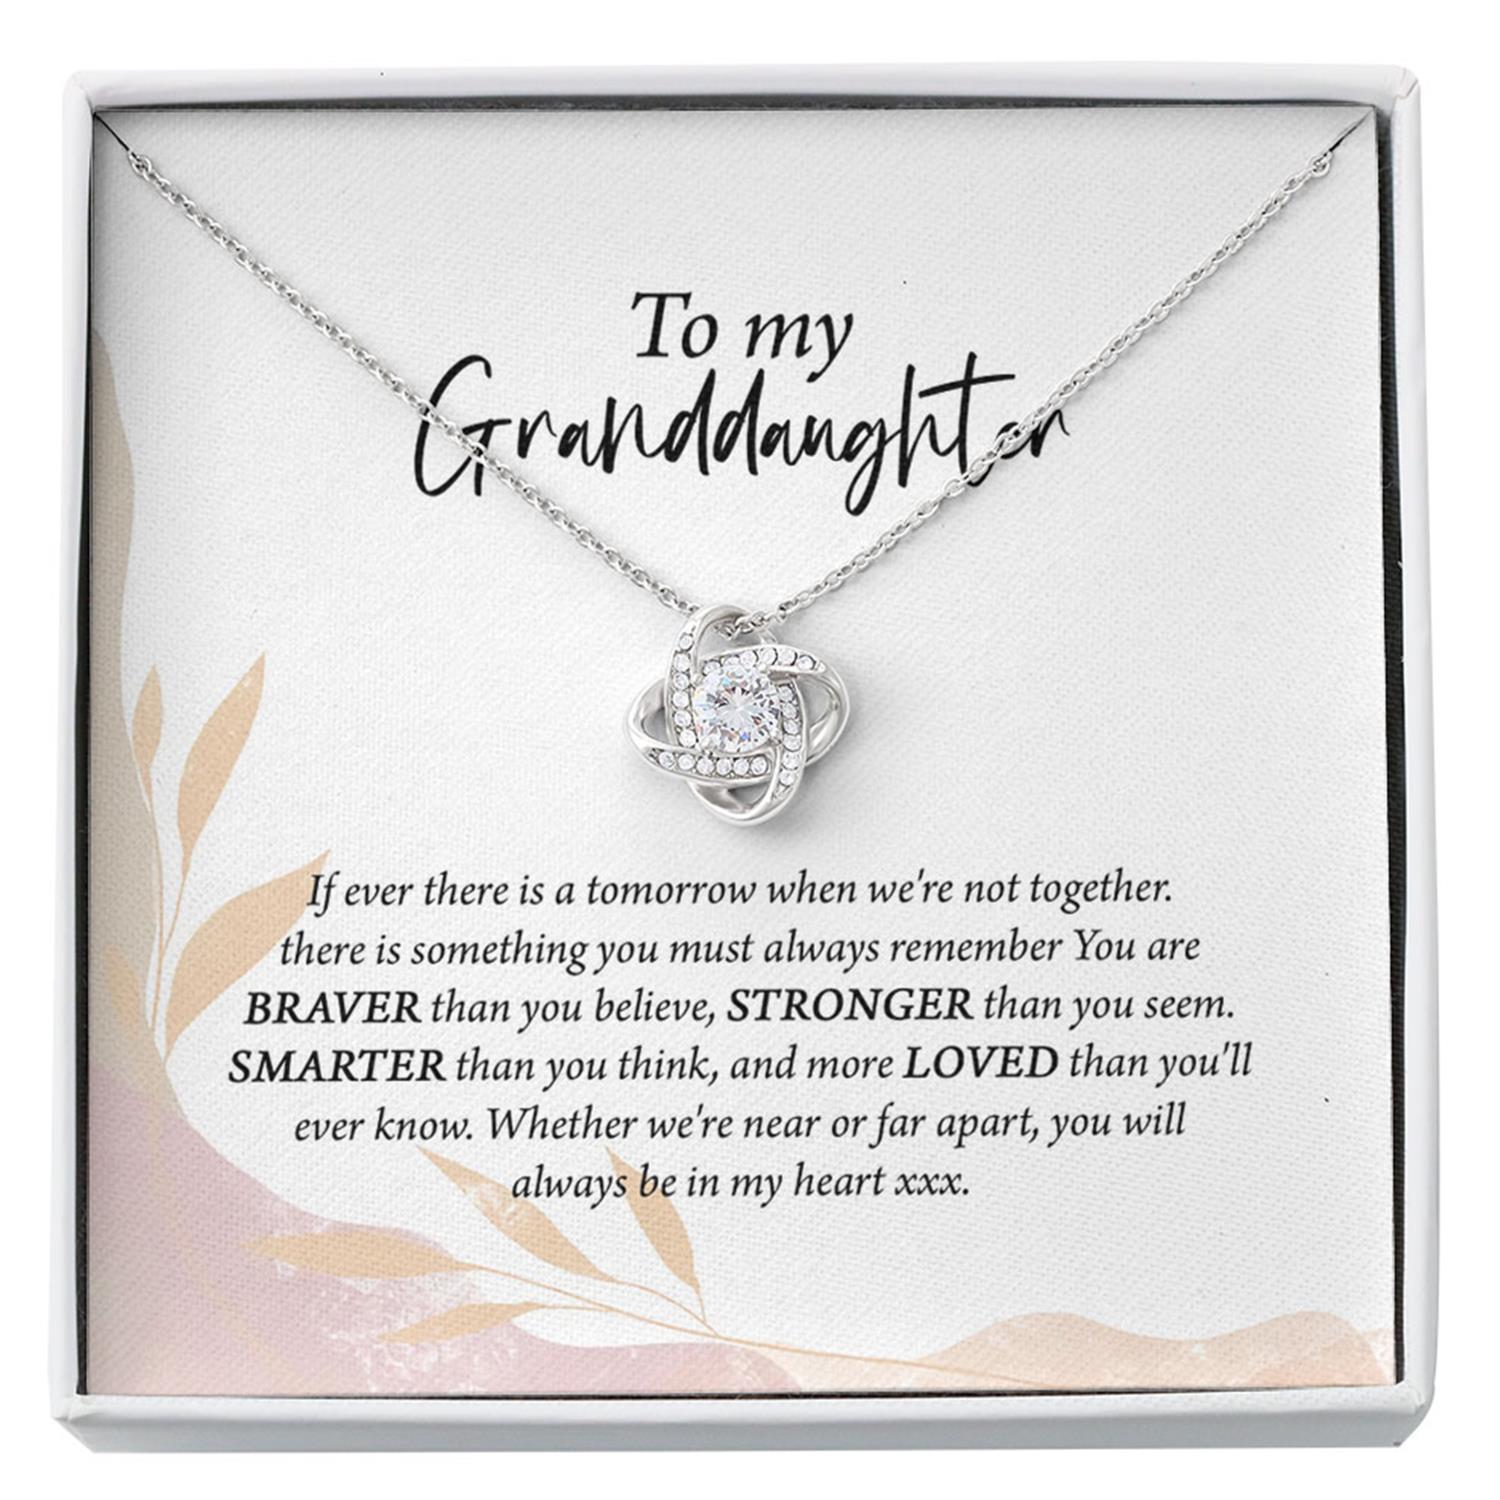 Granddaughter Necklace, To My Granddaughter Necklace, Granddaughter Sweet 16 Gifts Custom Necklace